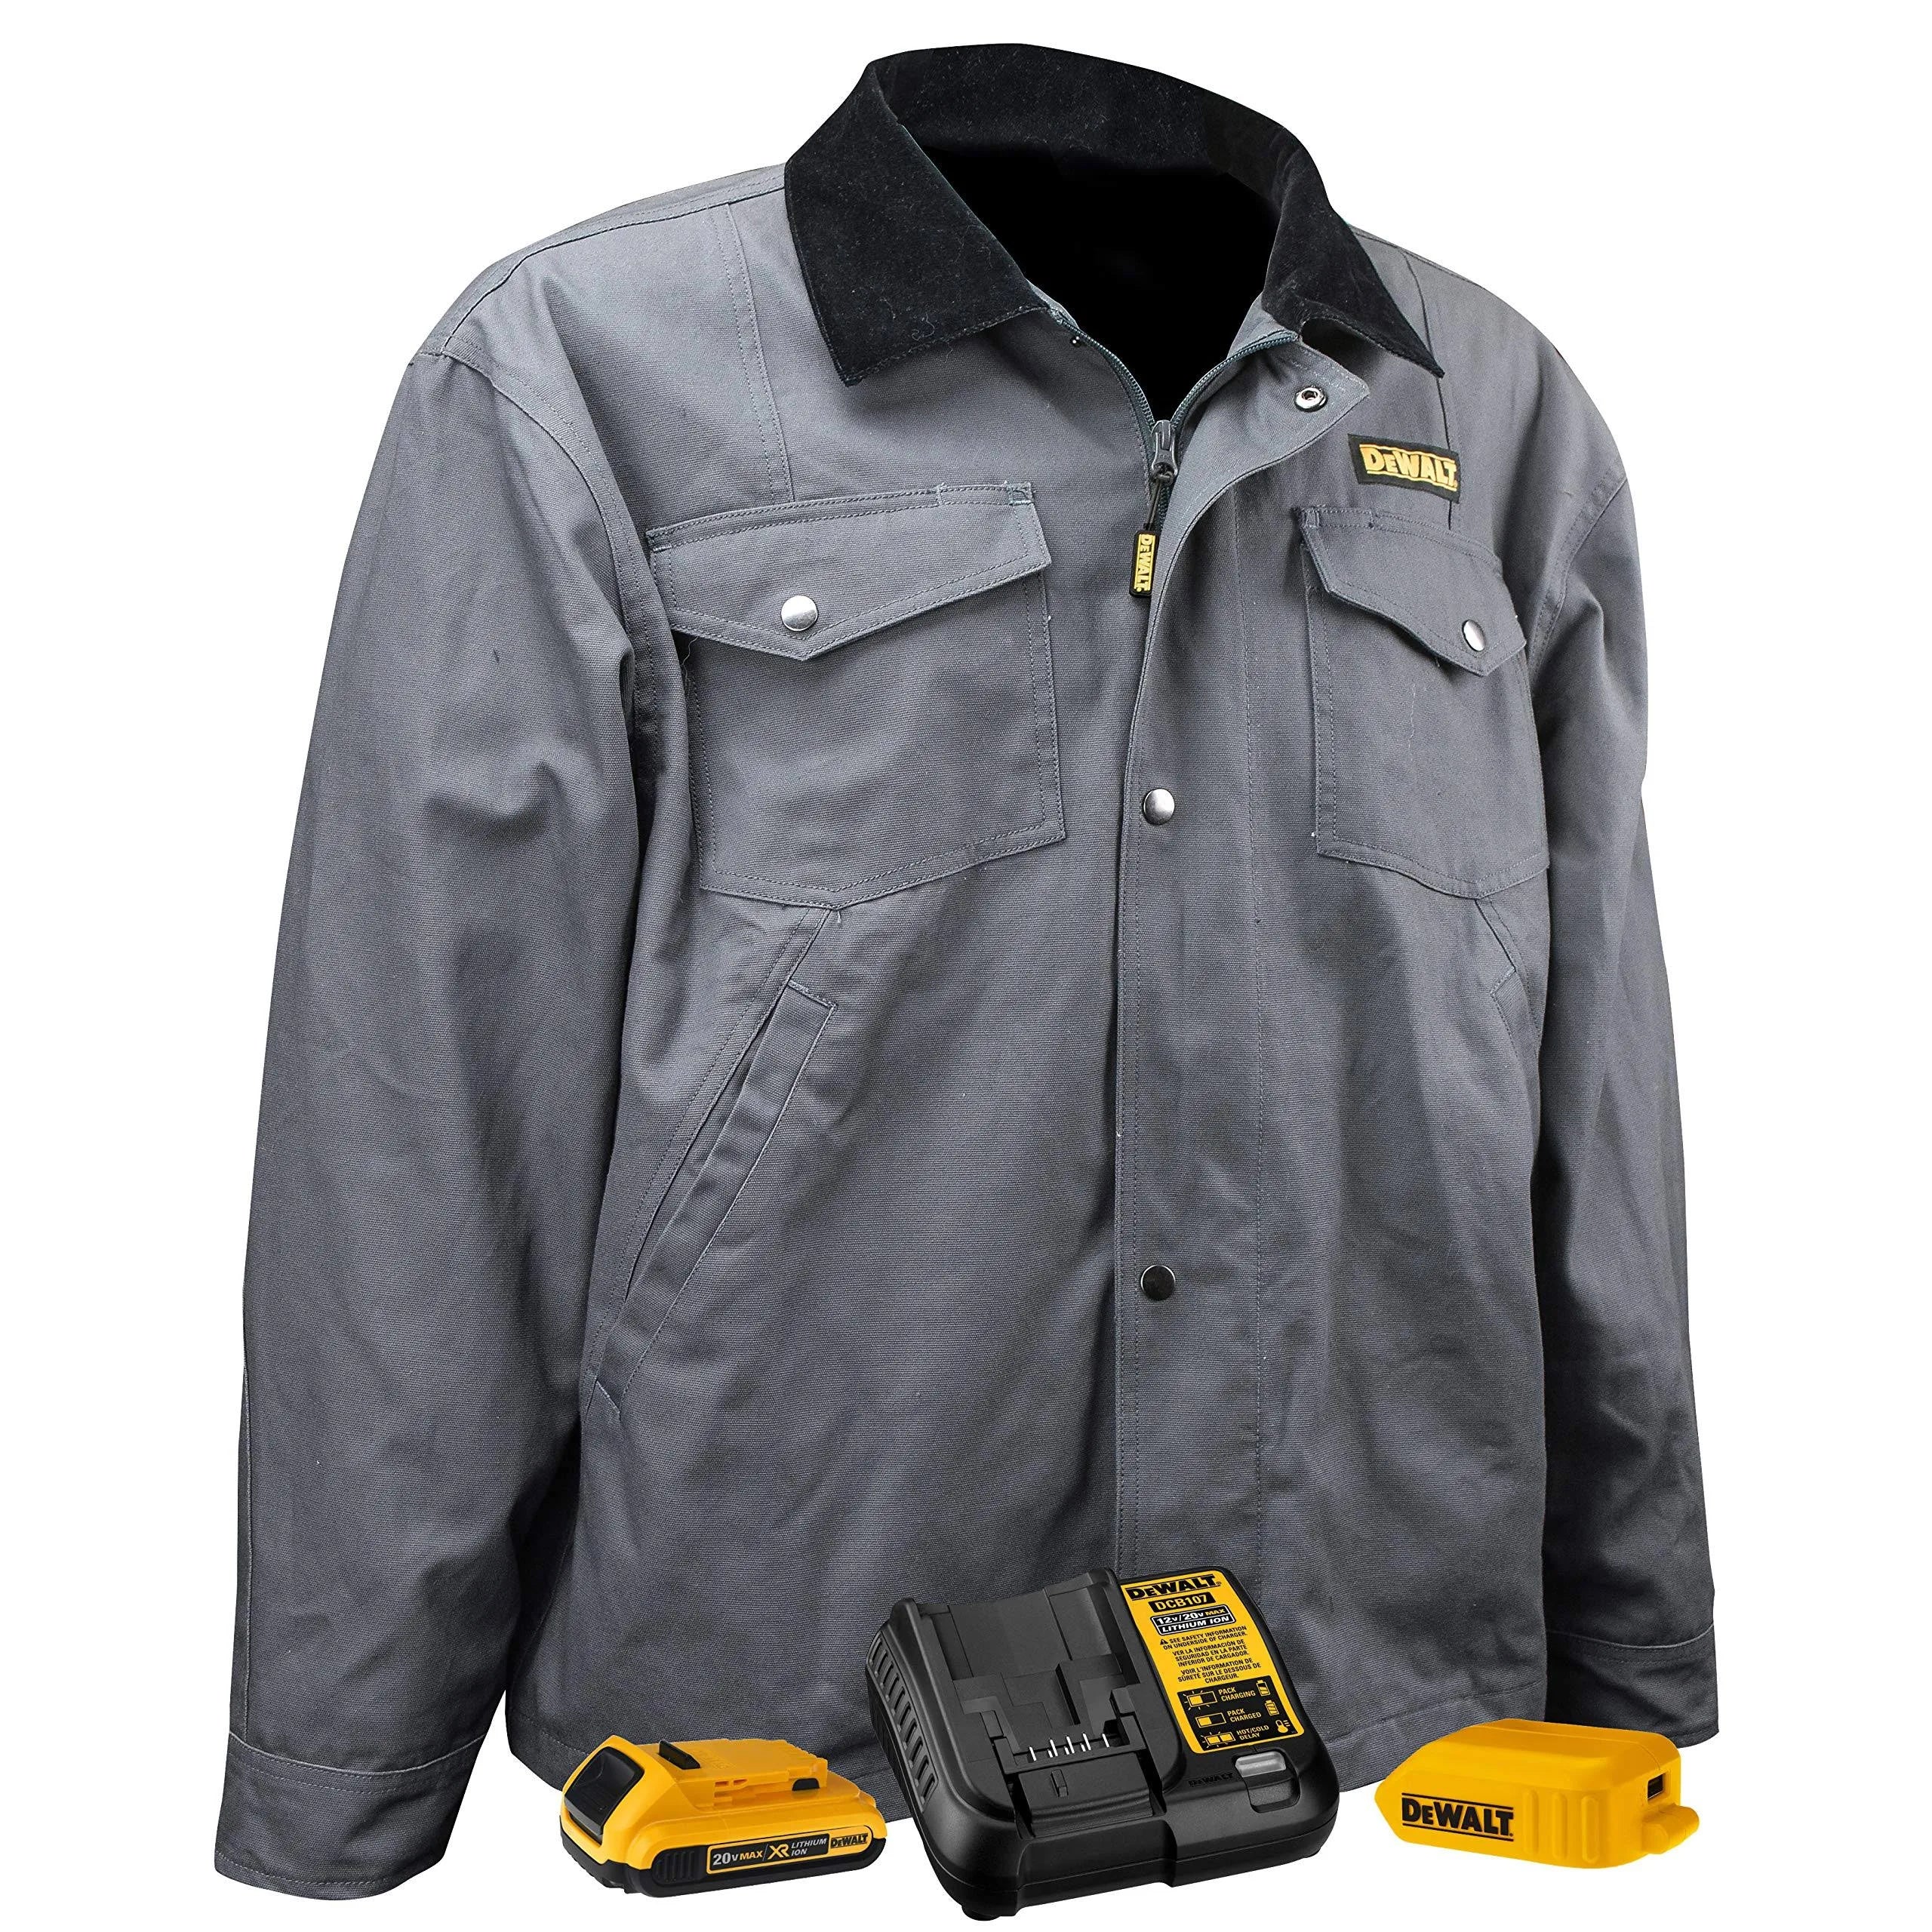 DeWalt DCHJ083CD1-S Charcoal Color 20V MAX Lithium Ion Barn Coat with Battery Kit Small